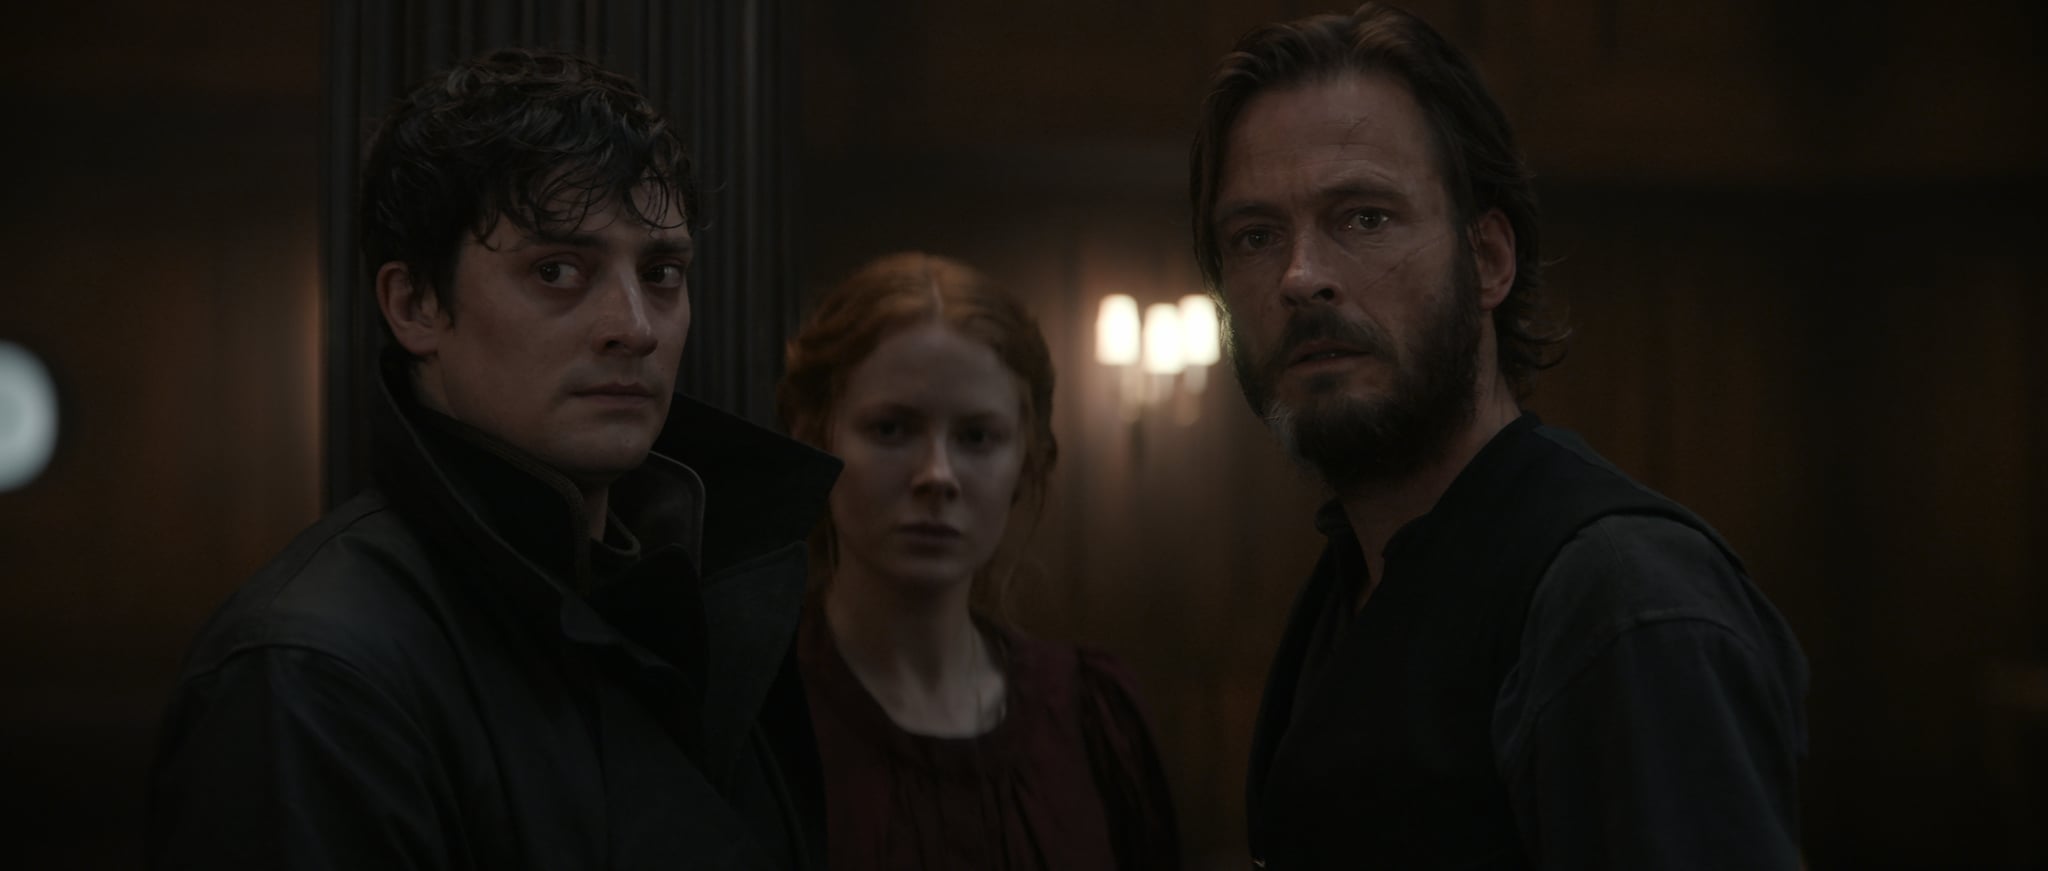 Official Trailer for '1899' Series - Mystery Sci-Fi About a Ghost Ship